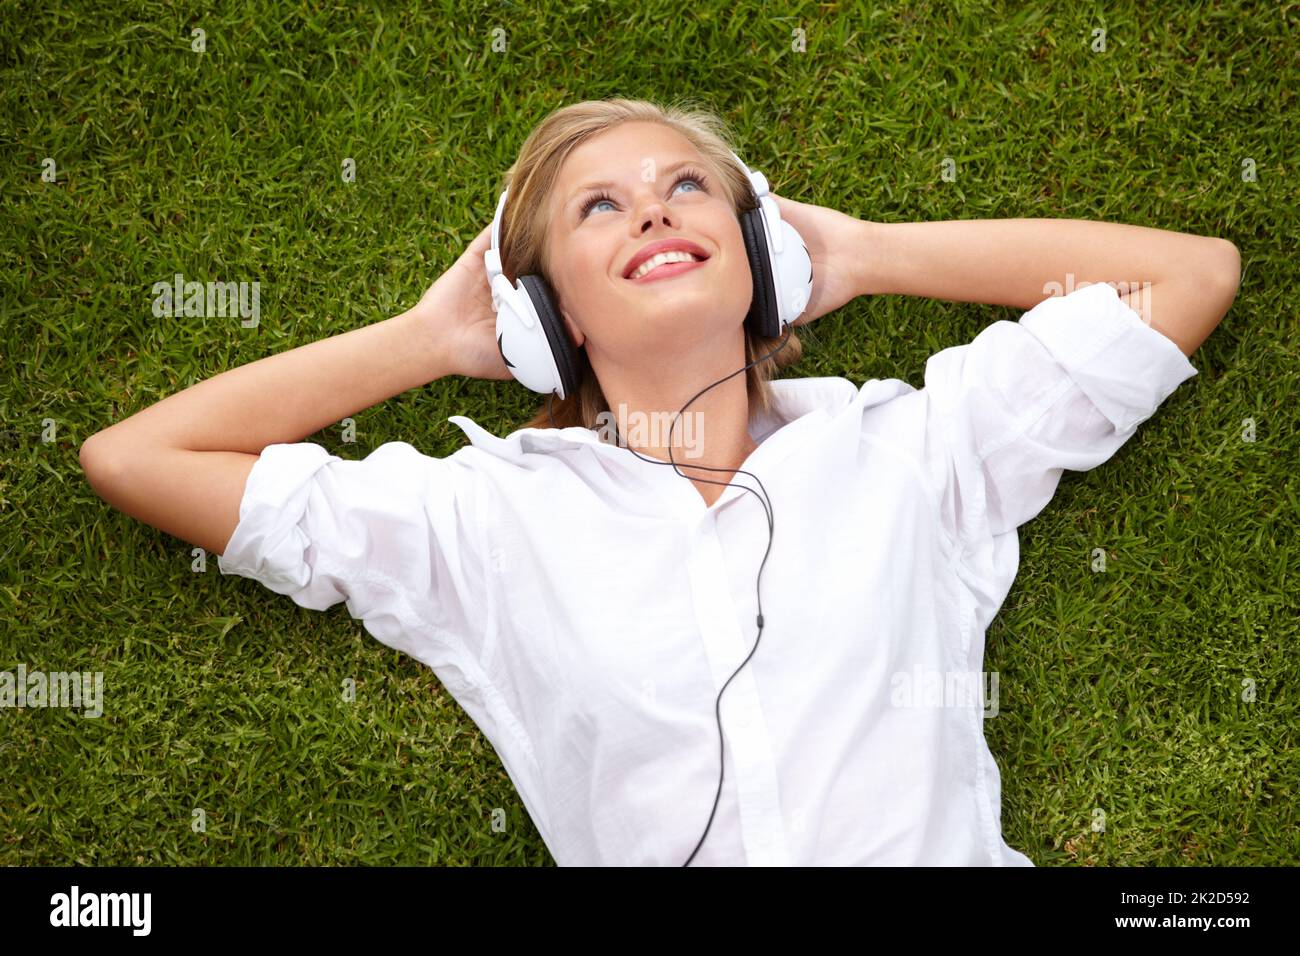 Getting lost in the music. High angle shot of a woman lying on a grassy field listening to musicHigh angle shot of a woman lying on a grassy field listening to music with her eyes closed. Stock Photo